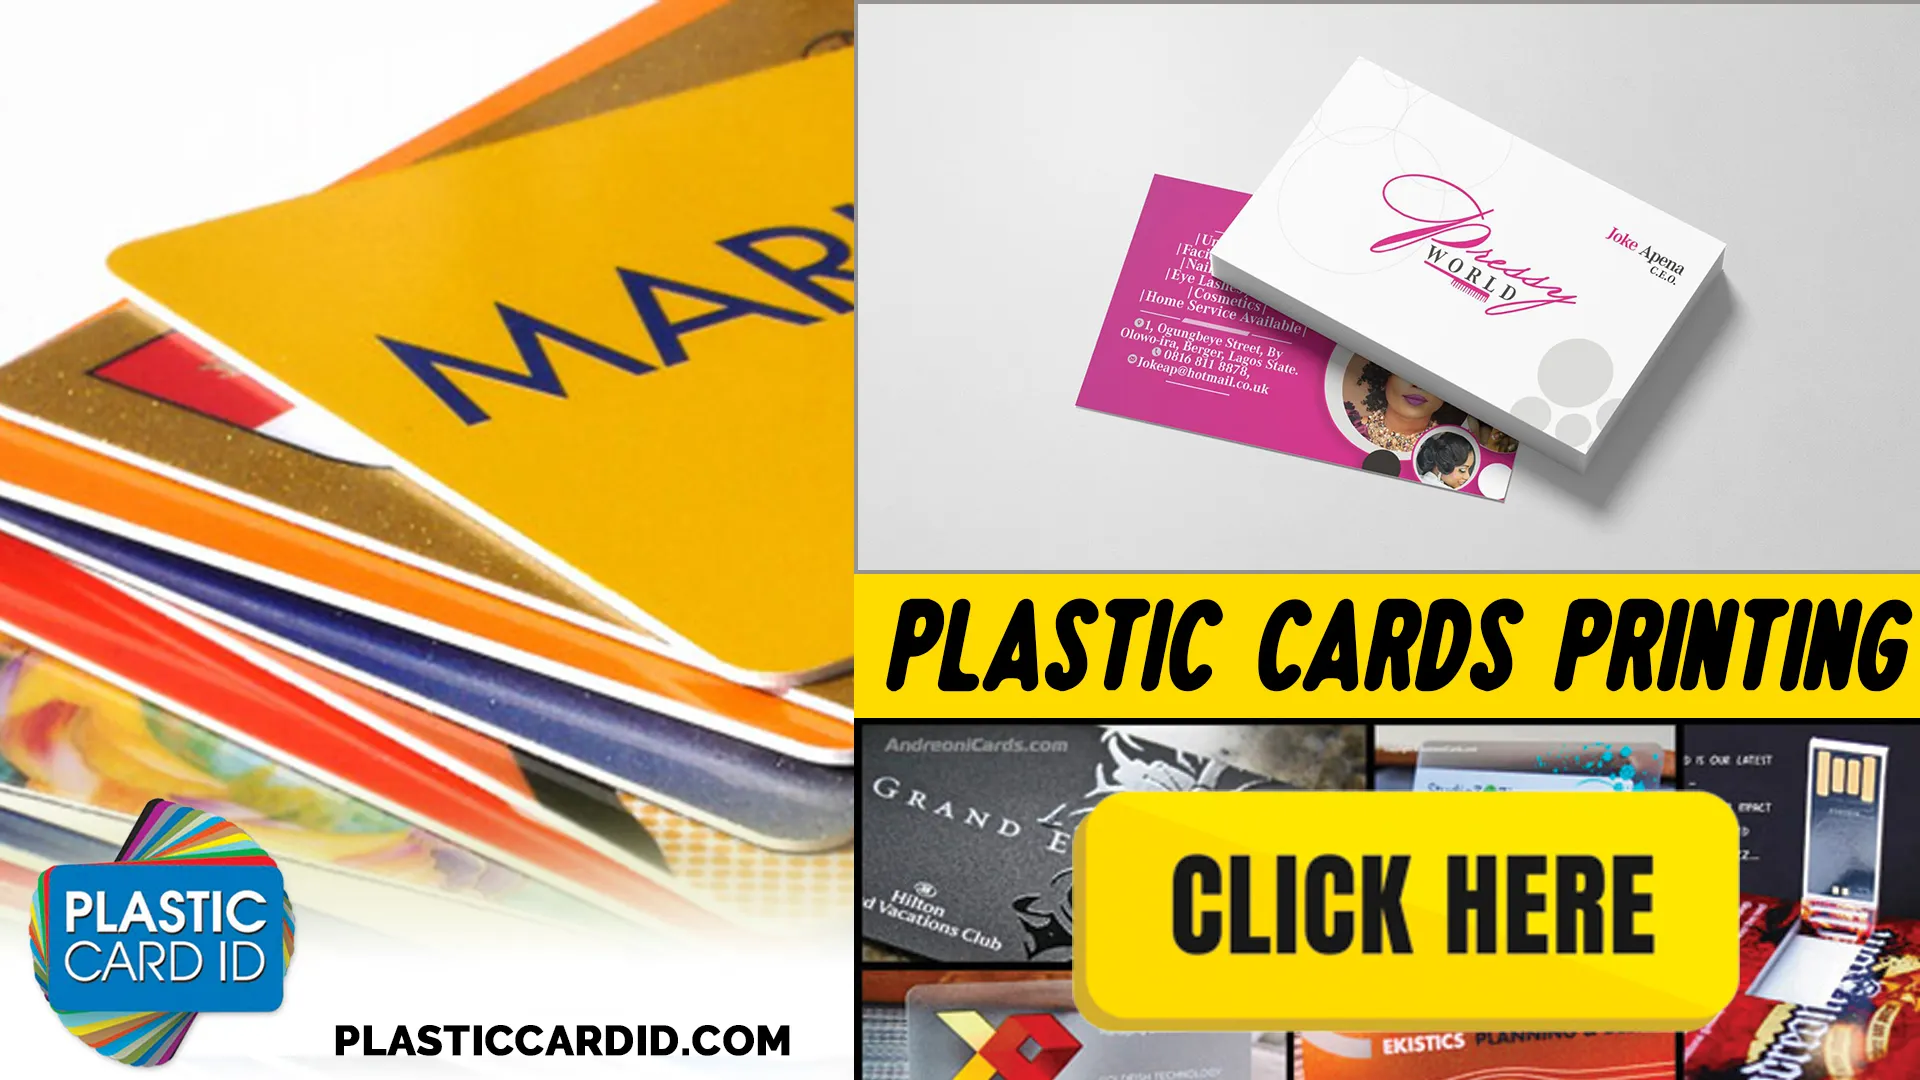 Streamline Your Workflow with Plastic Card ID
's Innovative Features